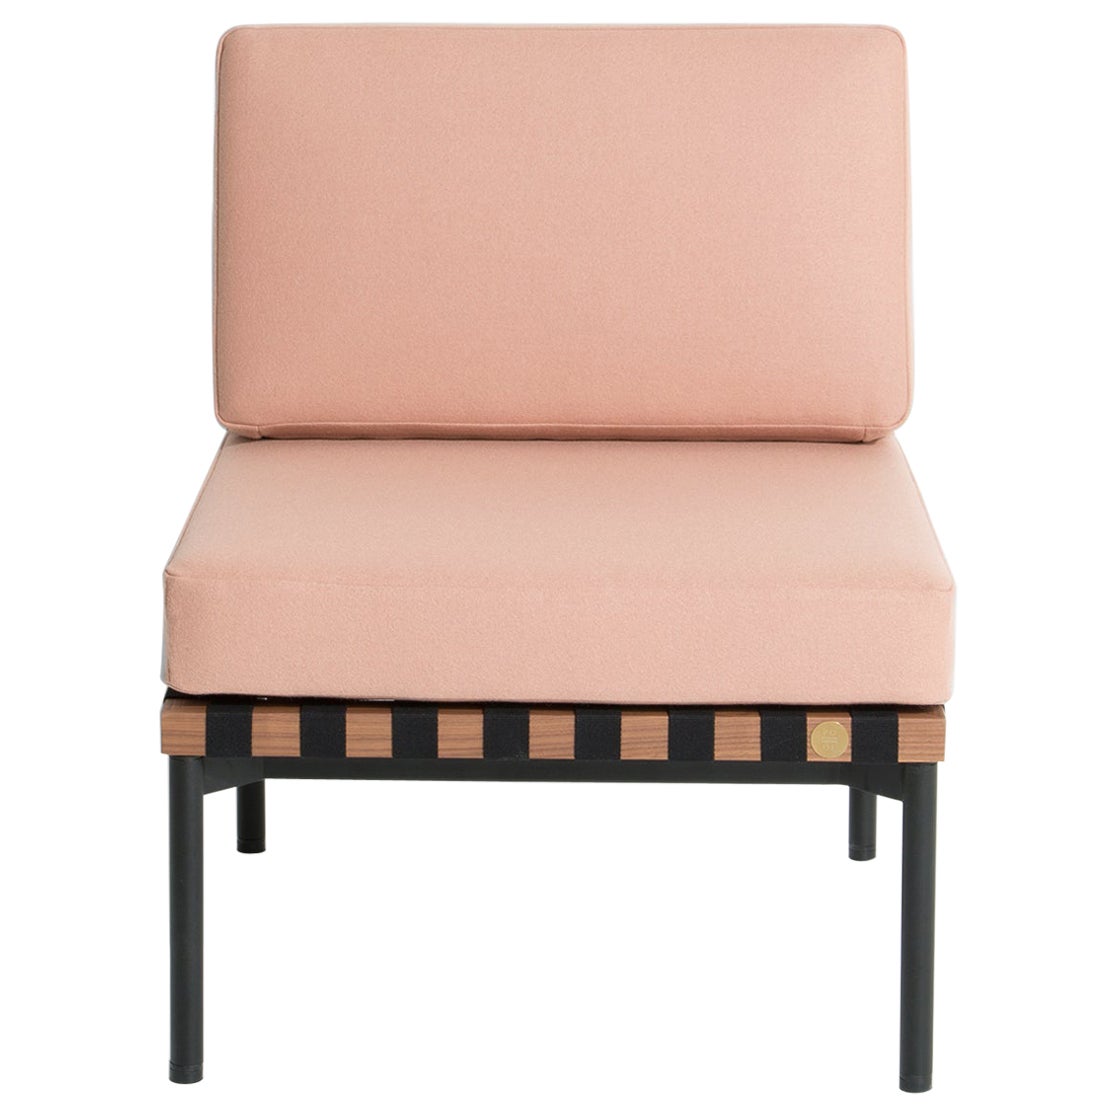 Petite Friture Grid Chair without Armrest in Peach by Studio Pool